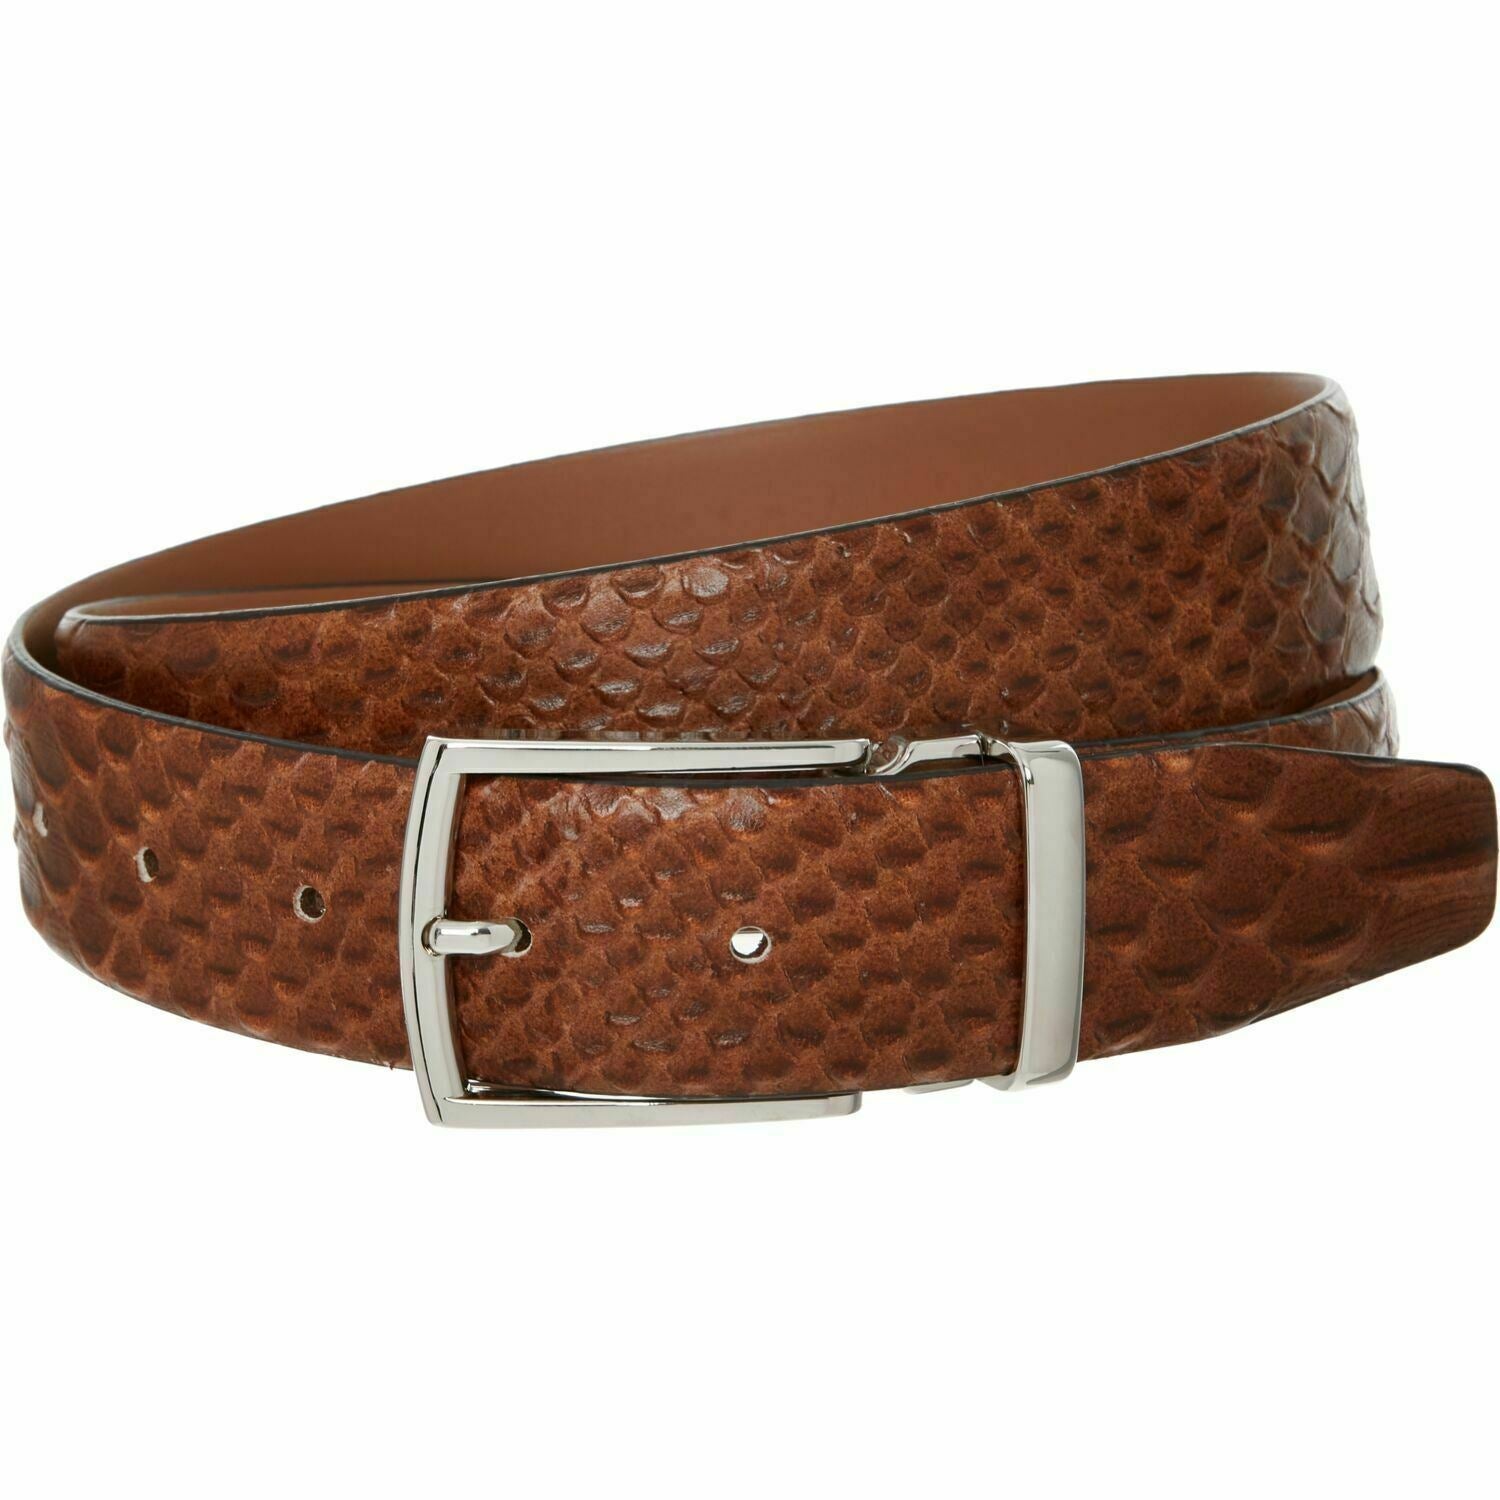 ANDERSON'S Men's Genuine Leather Reptile Effect Belt, Tan Brown, size W32